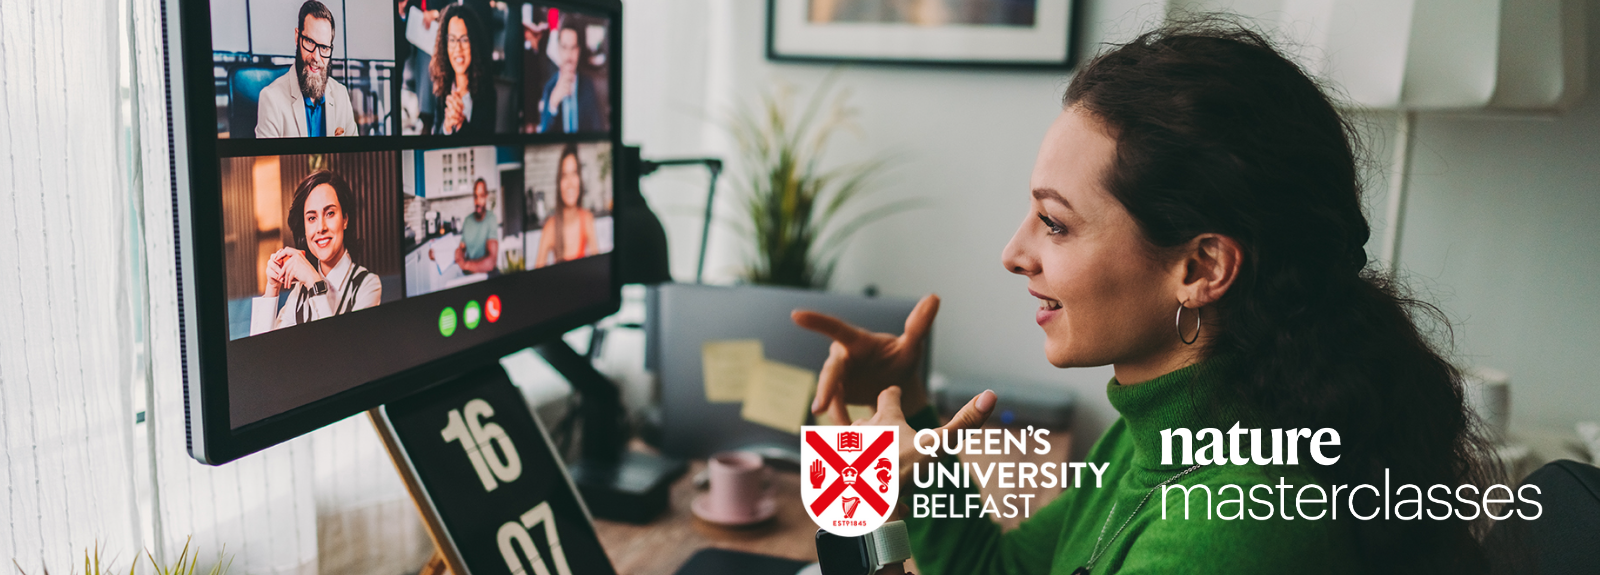 Image shows a woman sitting at her computer, taking part in an online masterclass/ workshop. Colleagues can be seen on screen talking and collaborating. Image contains Queen's University Belfast and Nature Masterclasses logos.